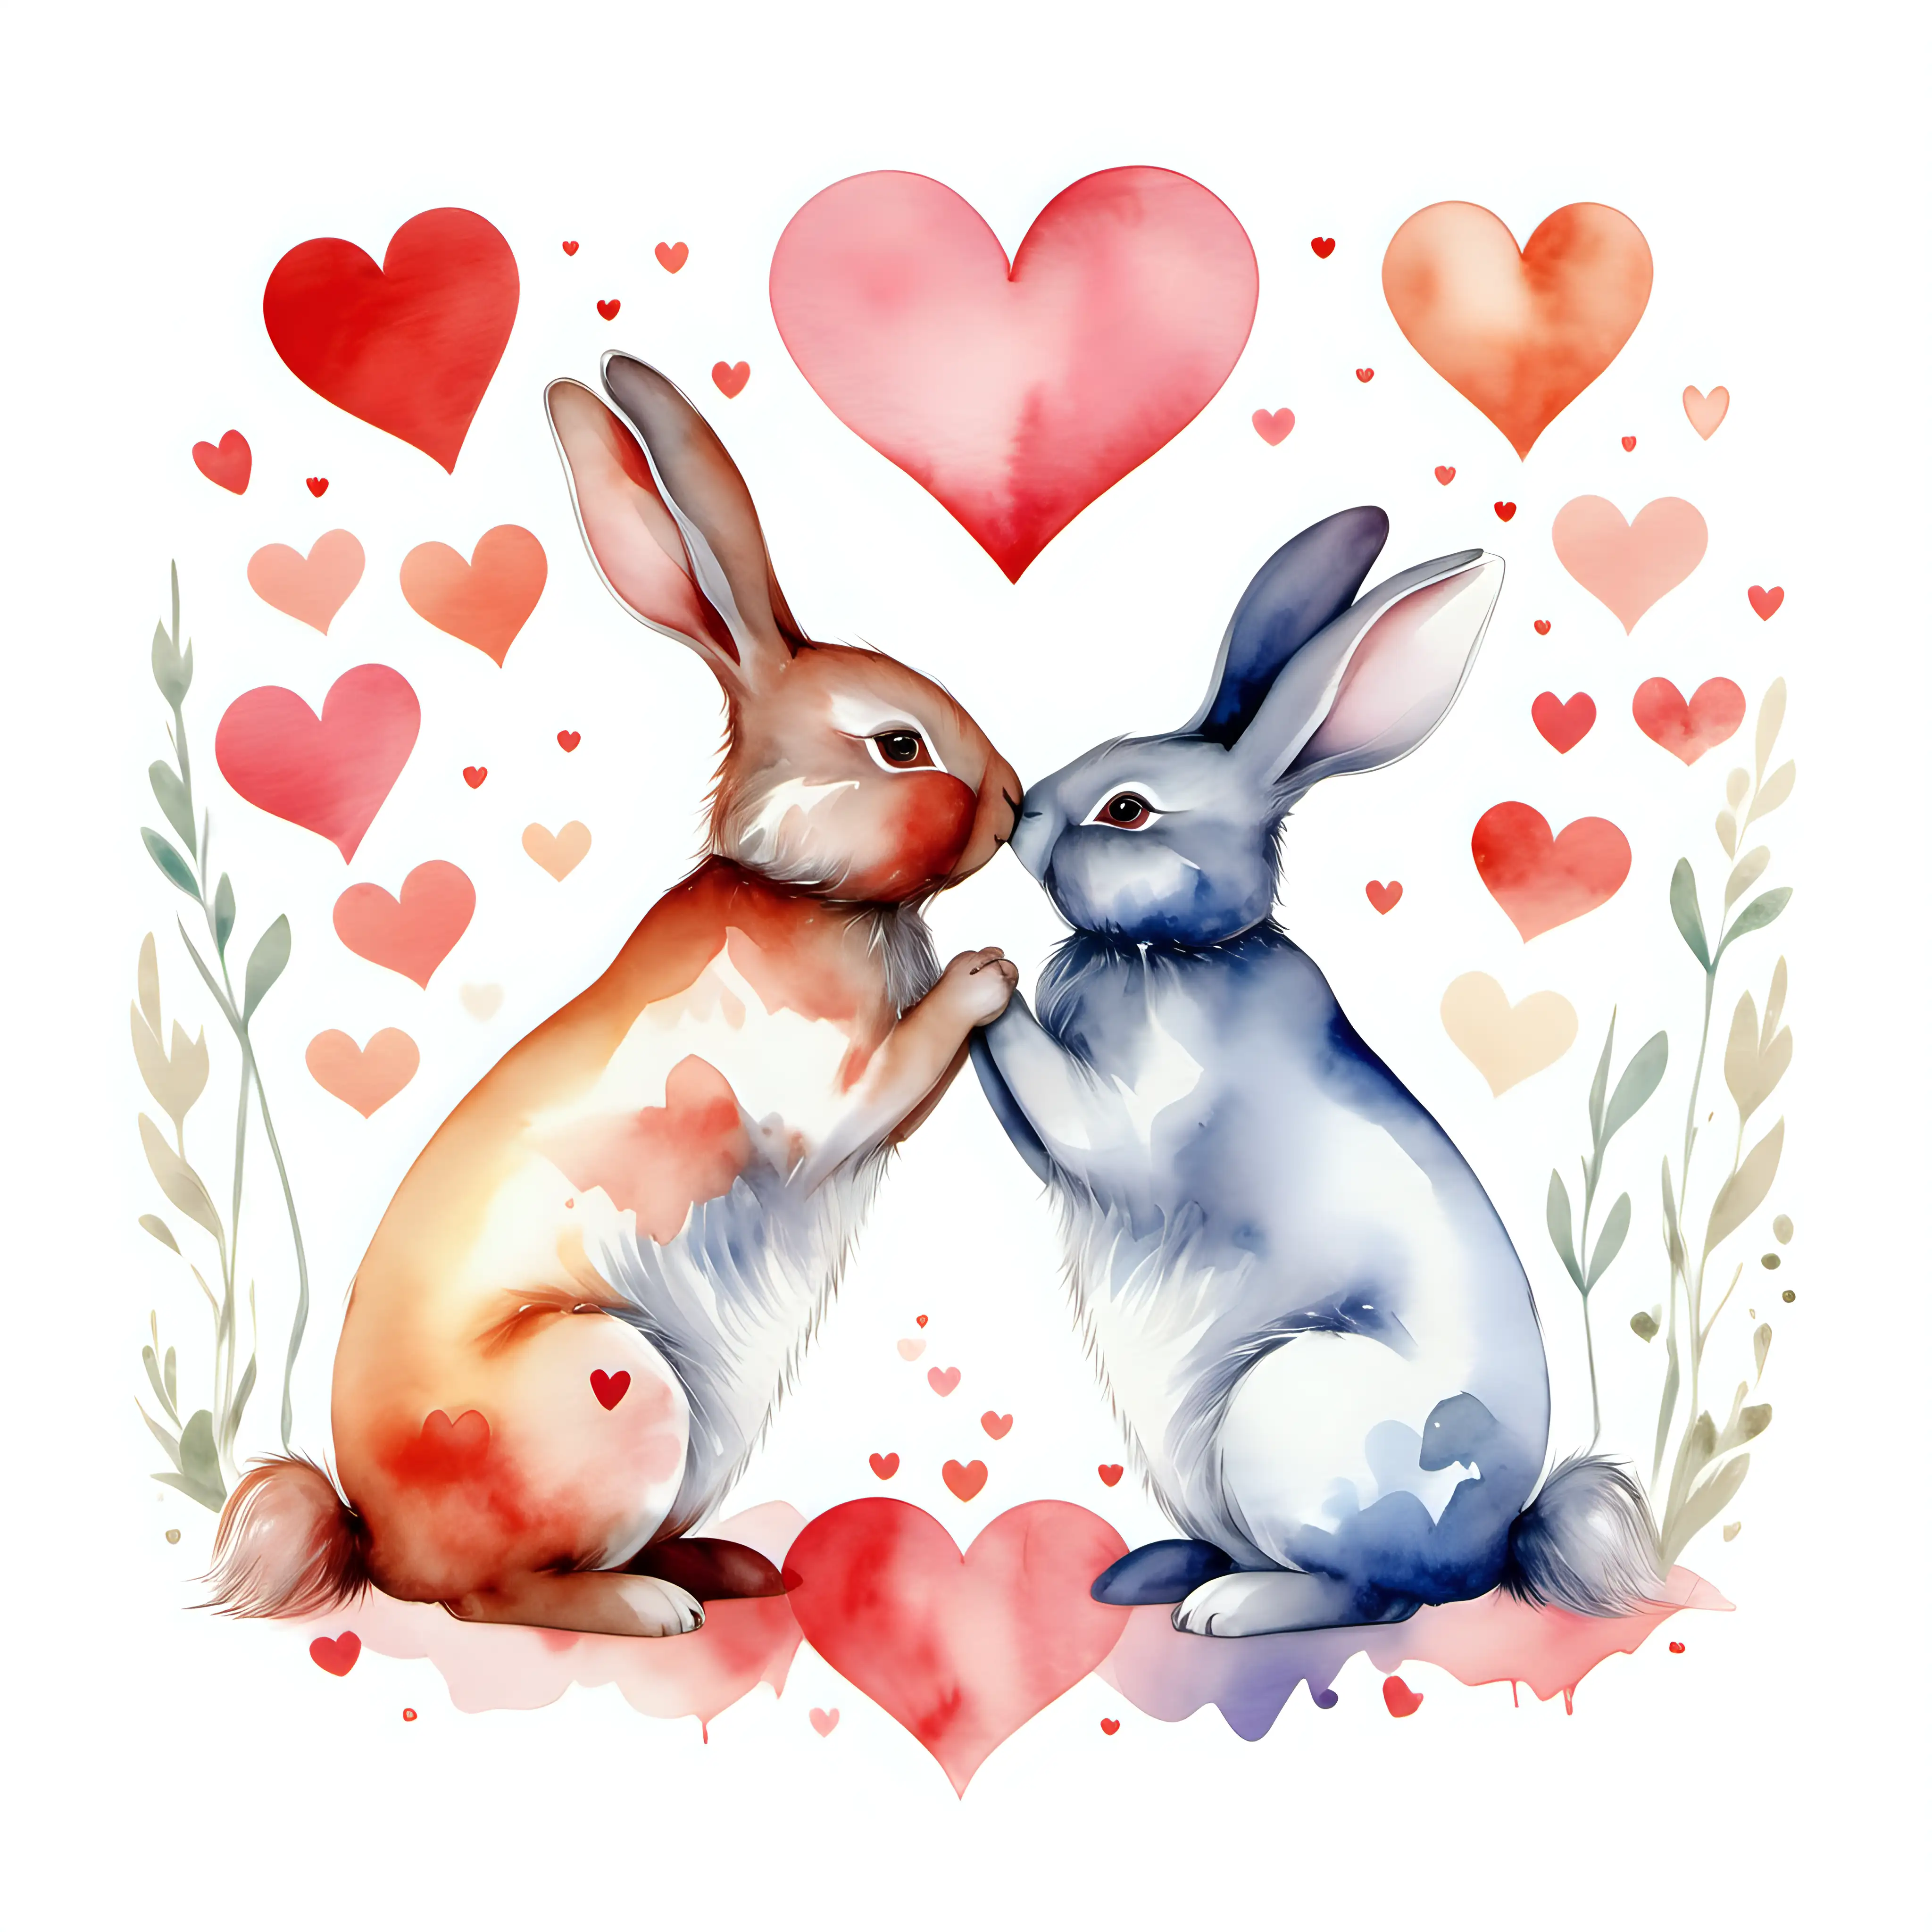 watercolor style, two rabbits touch noses surrounded by hearts on a white background